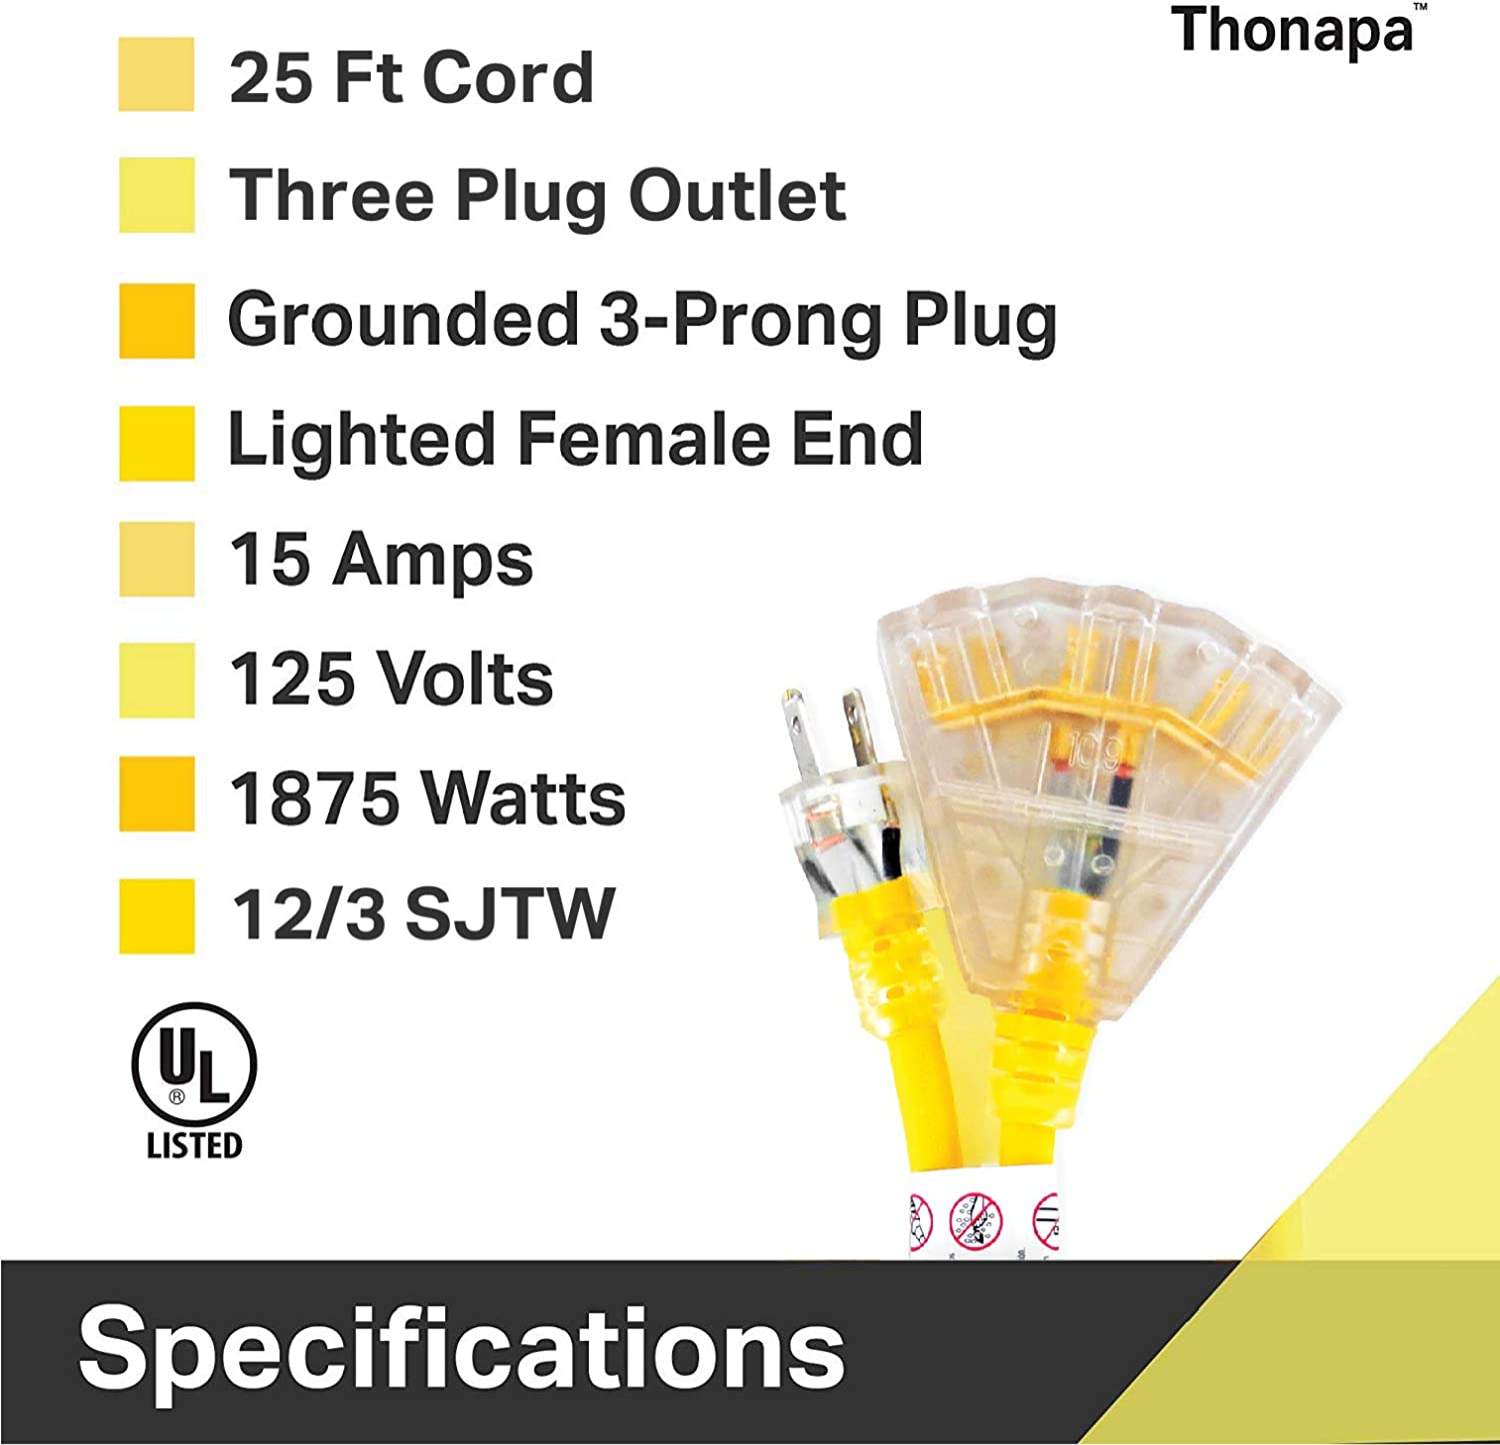 Yellow Jacket 100-ft. Outdoor Extension Cord w/ Lighted Ends - Fit2marts.com